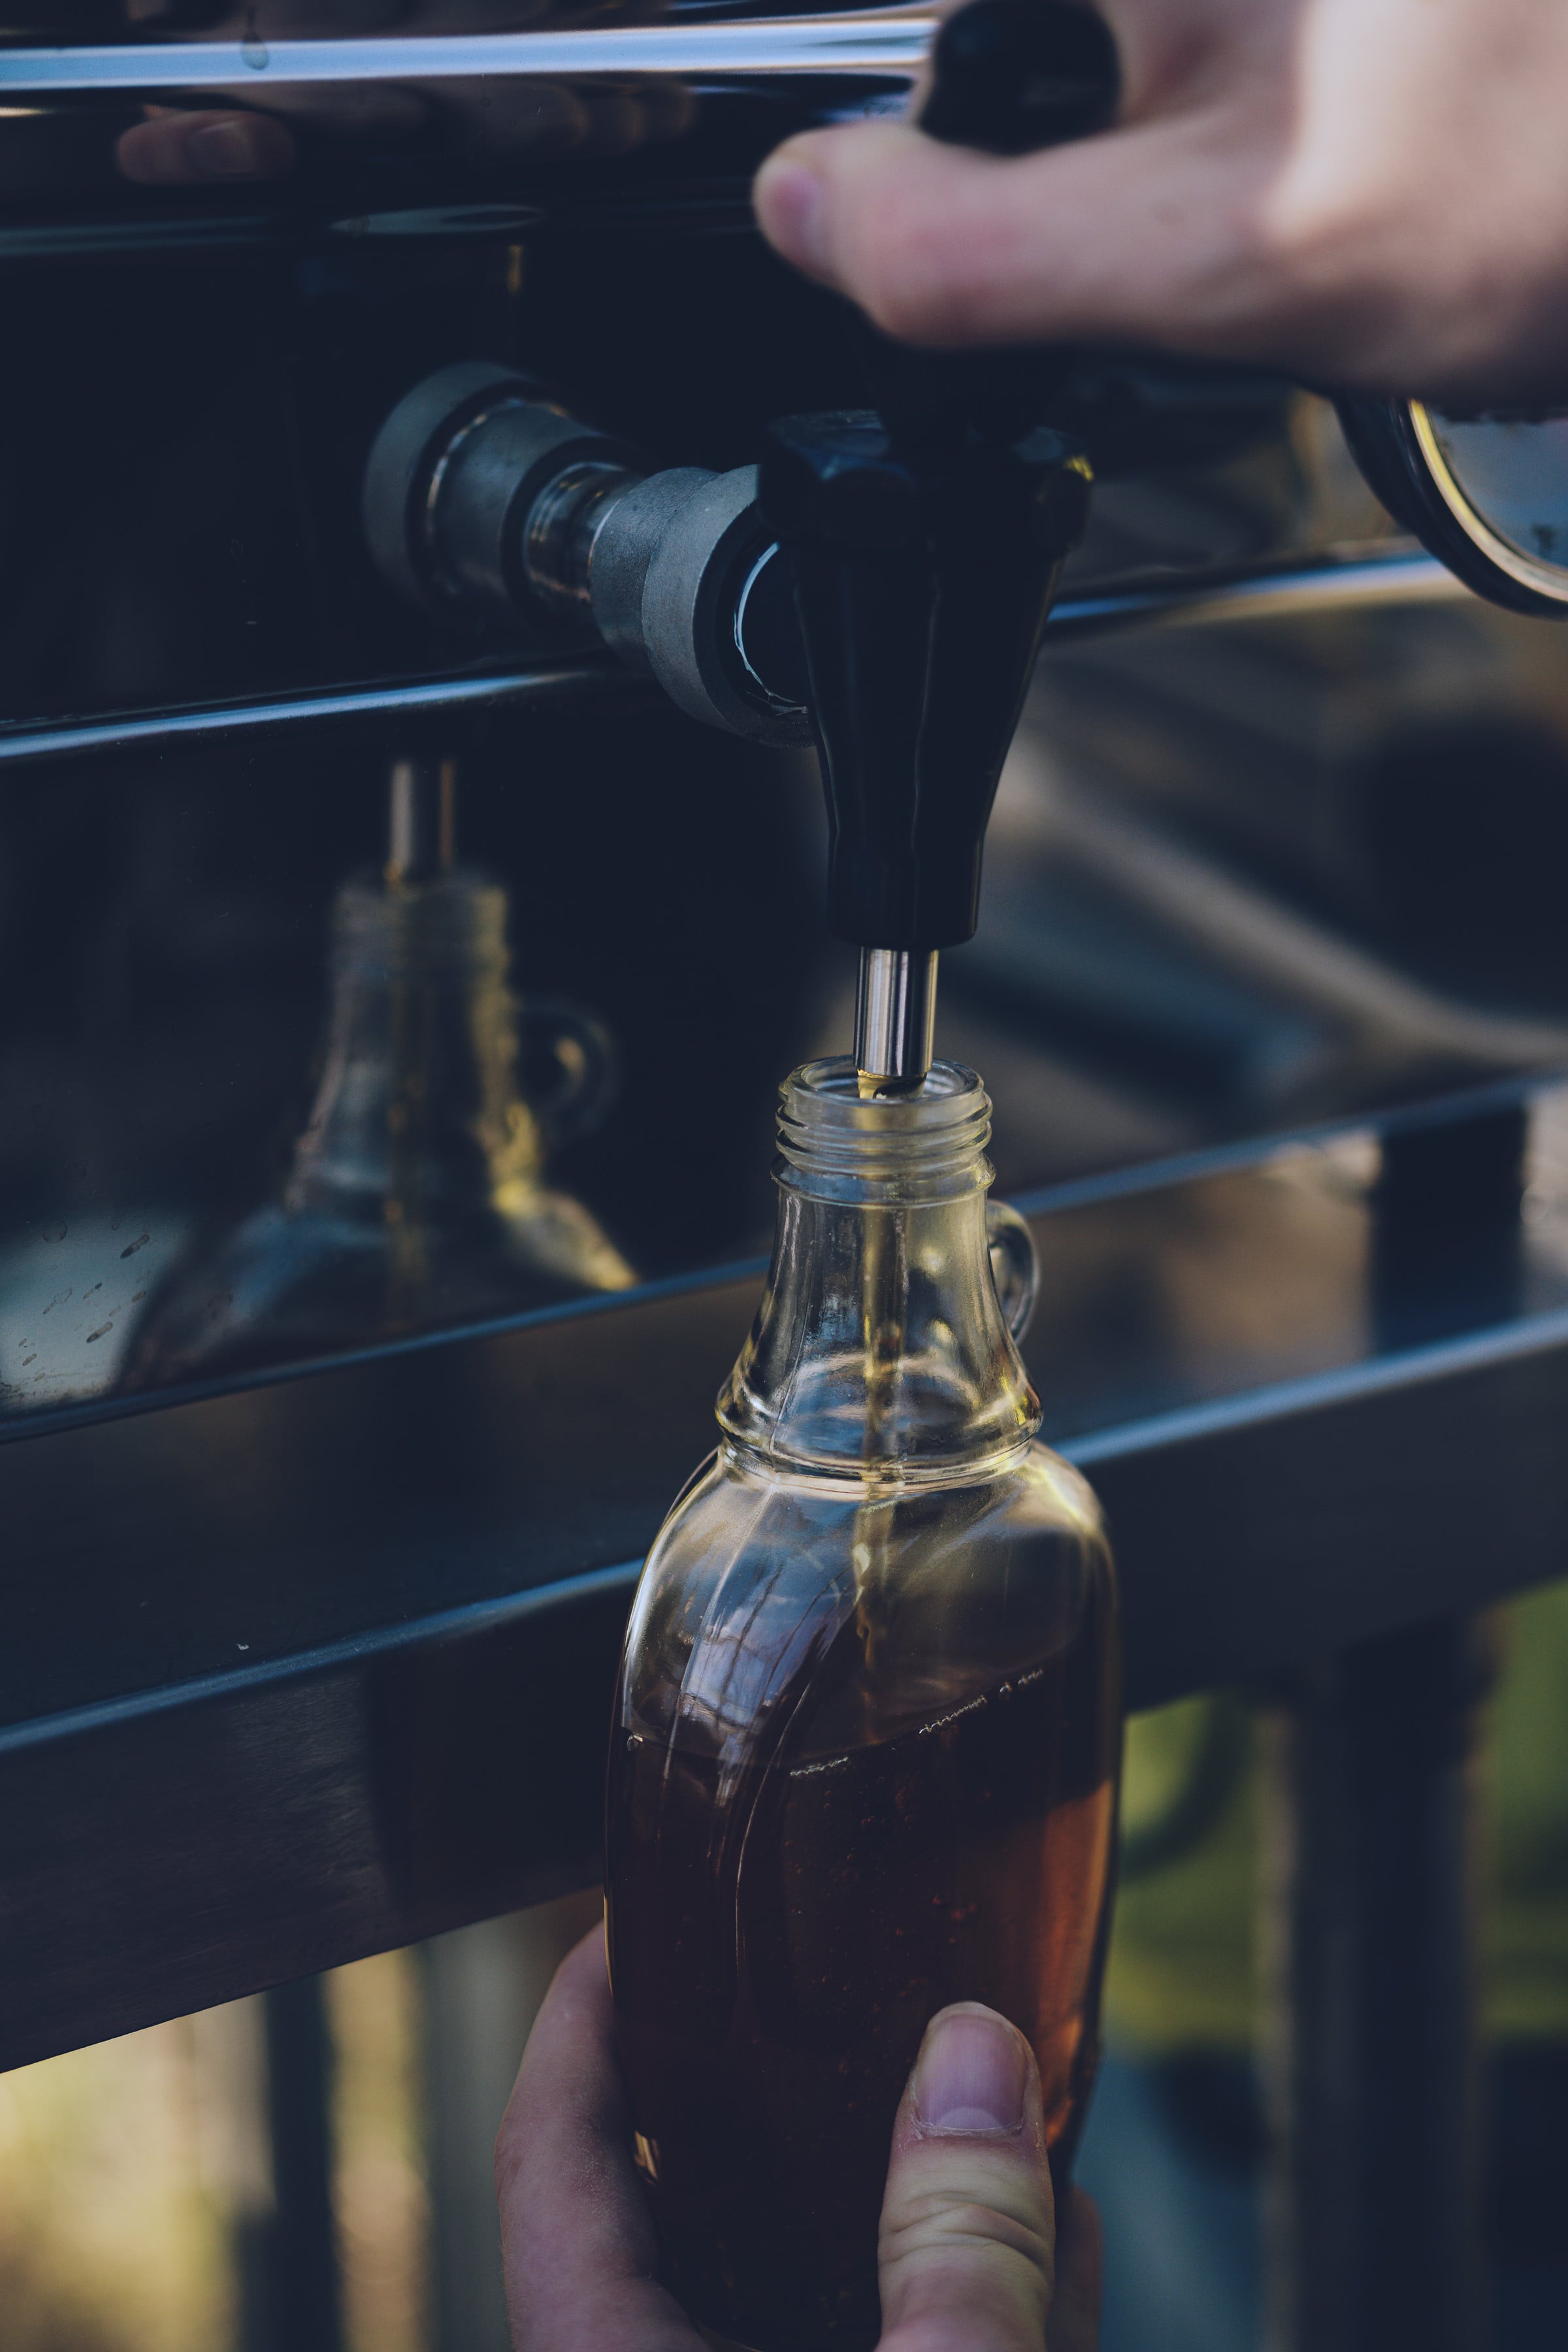 Image of a bottle being filled with Maple Syrup